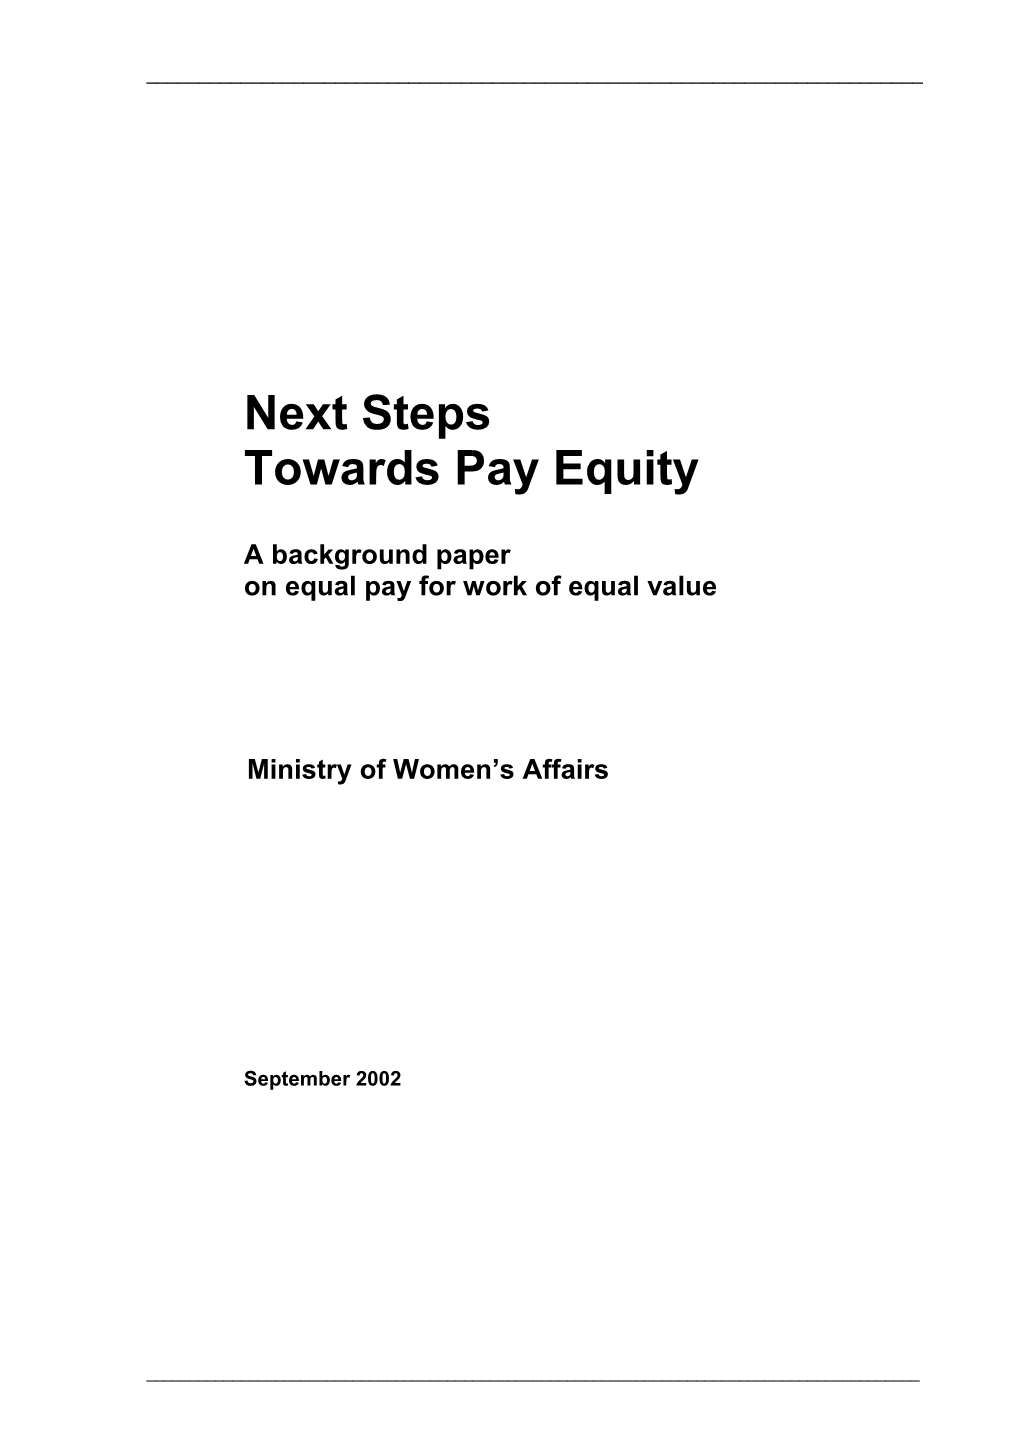 Next Steps Towards Pay Equity